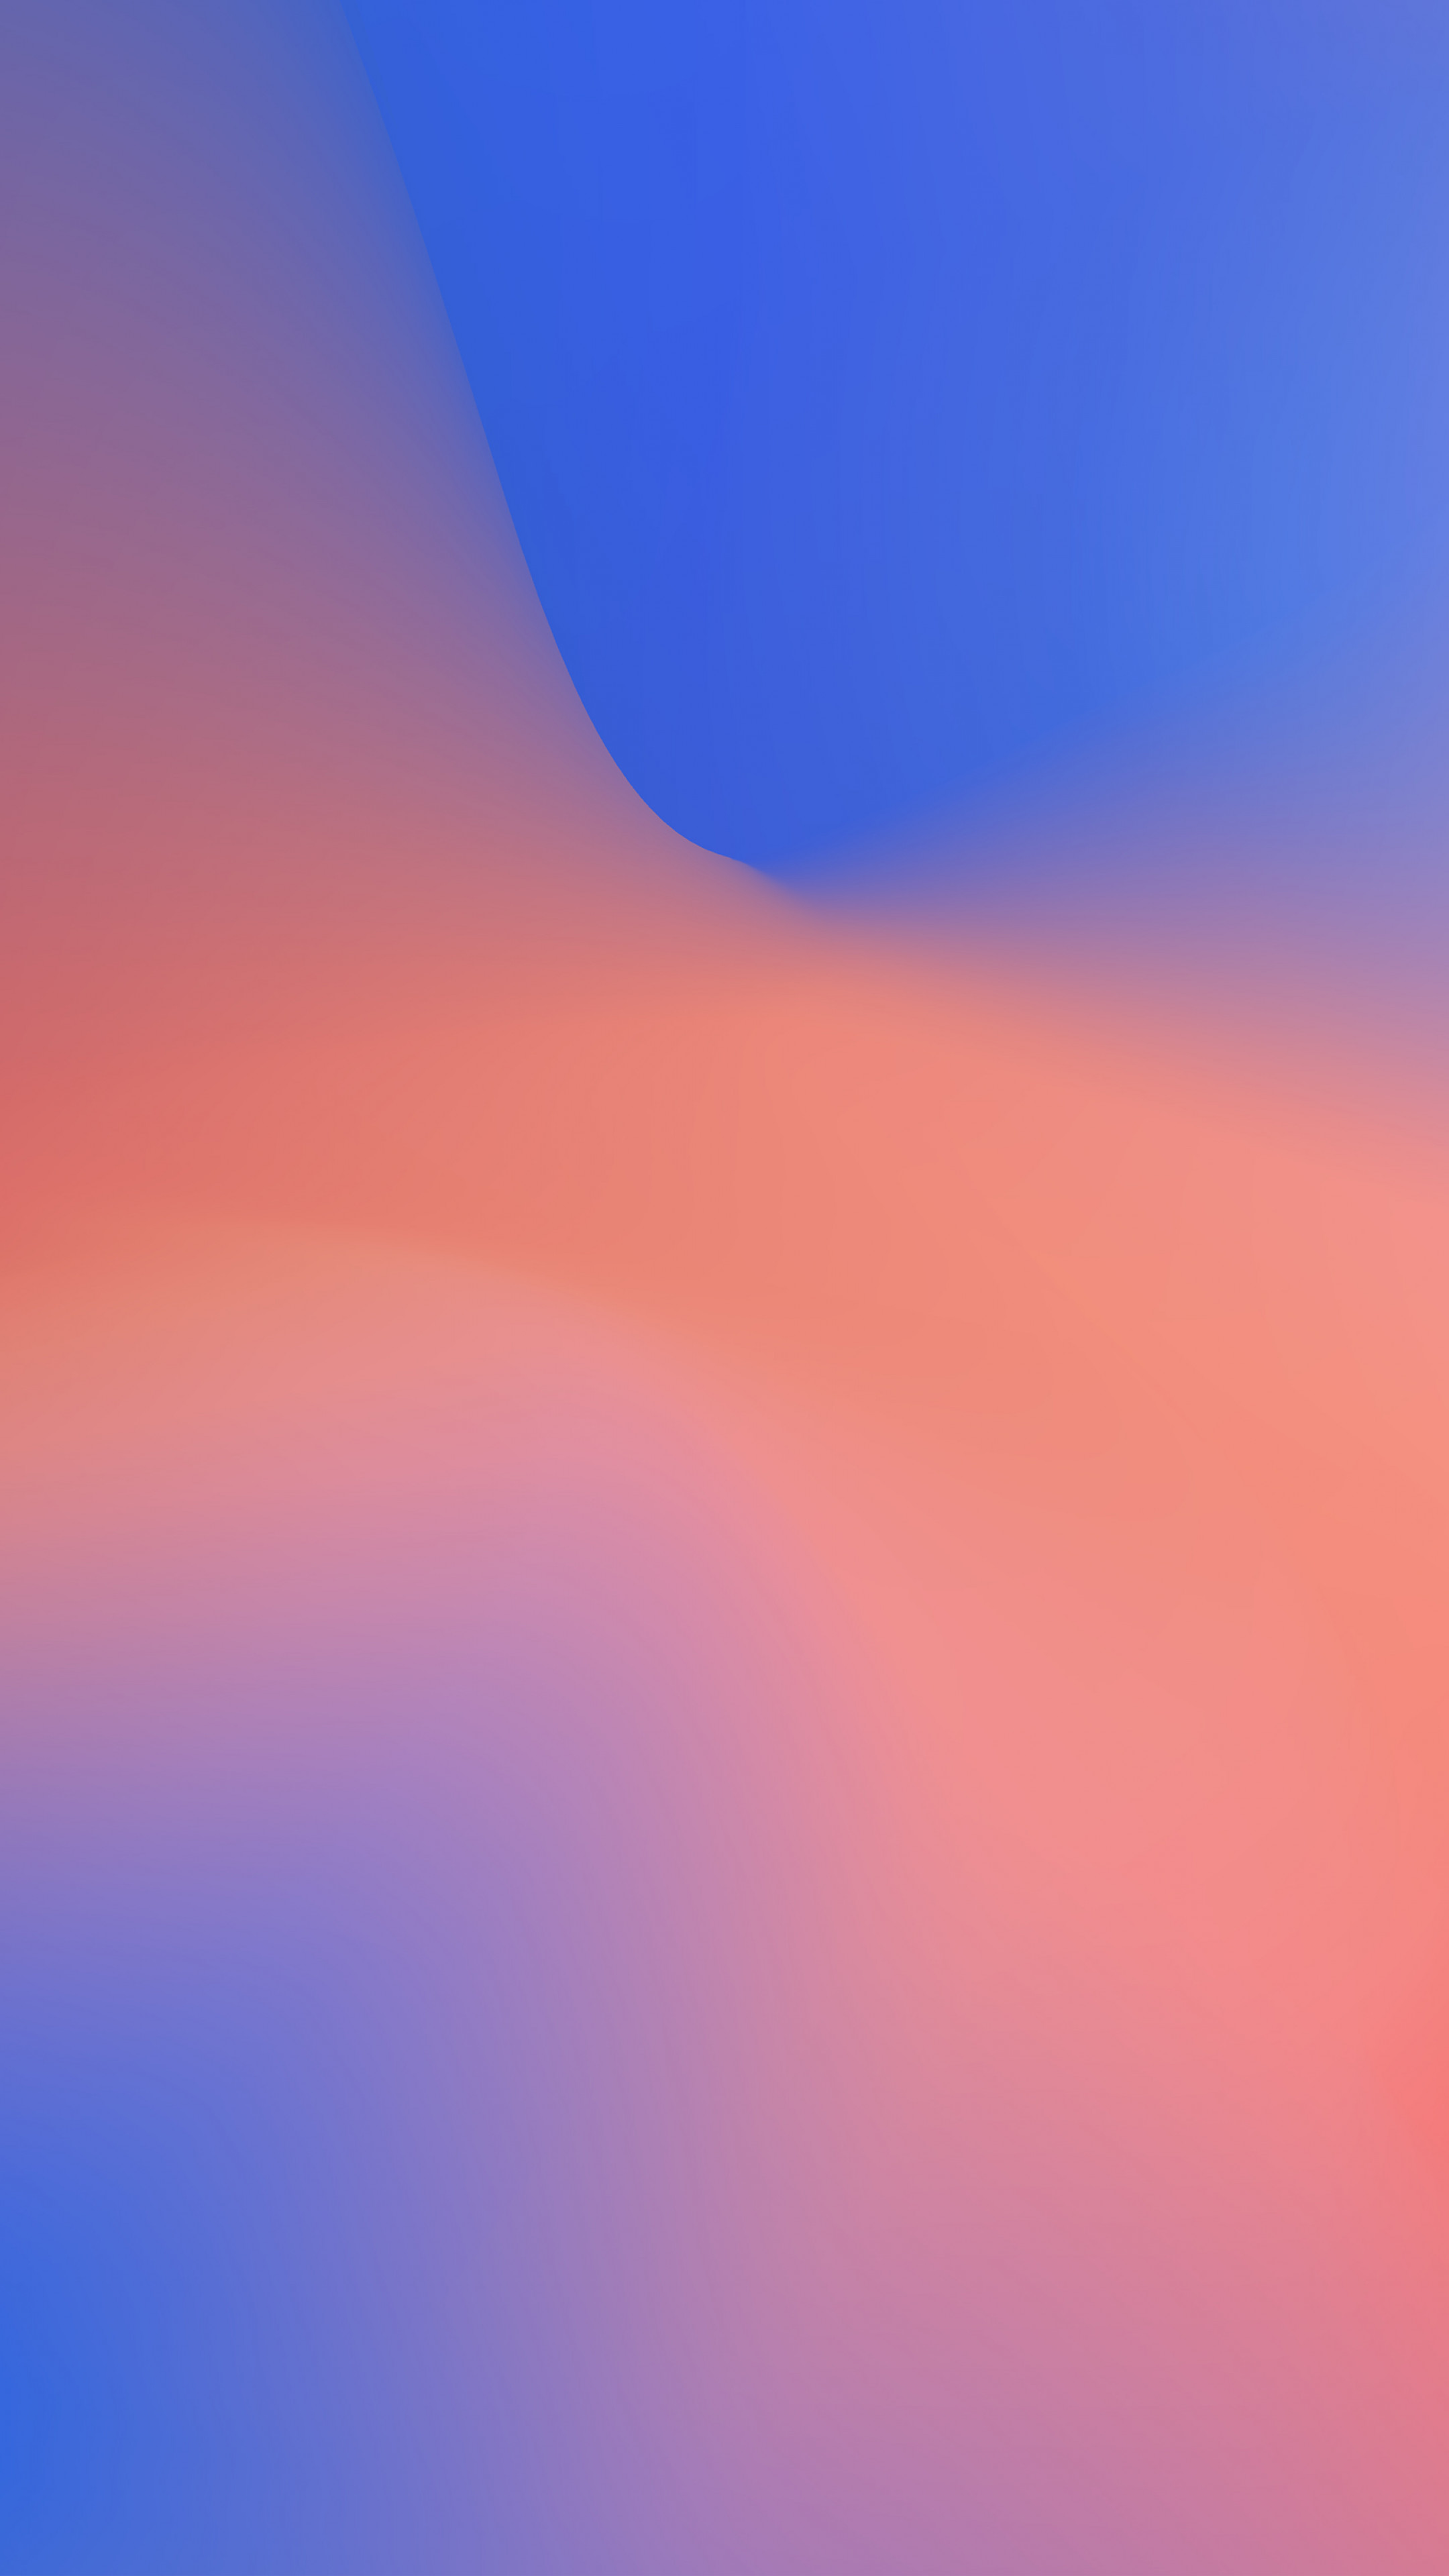 Wallpaper Google Pixel 3 Android 9 Pie Abstract 4k Os 20688